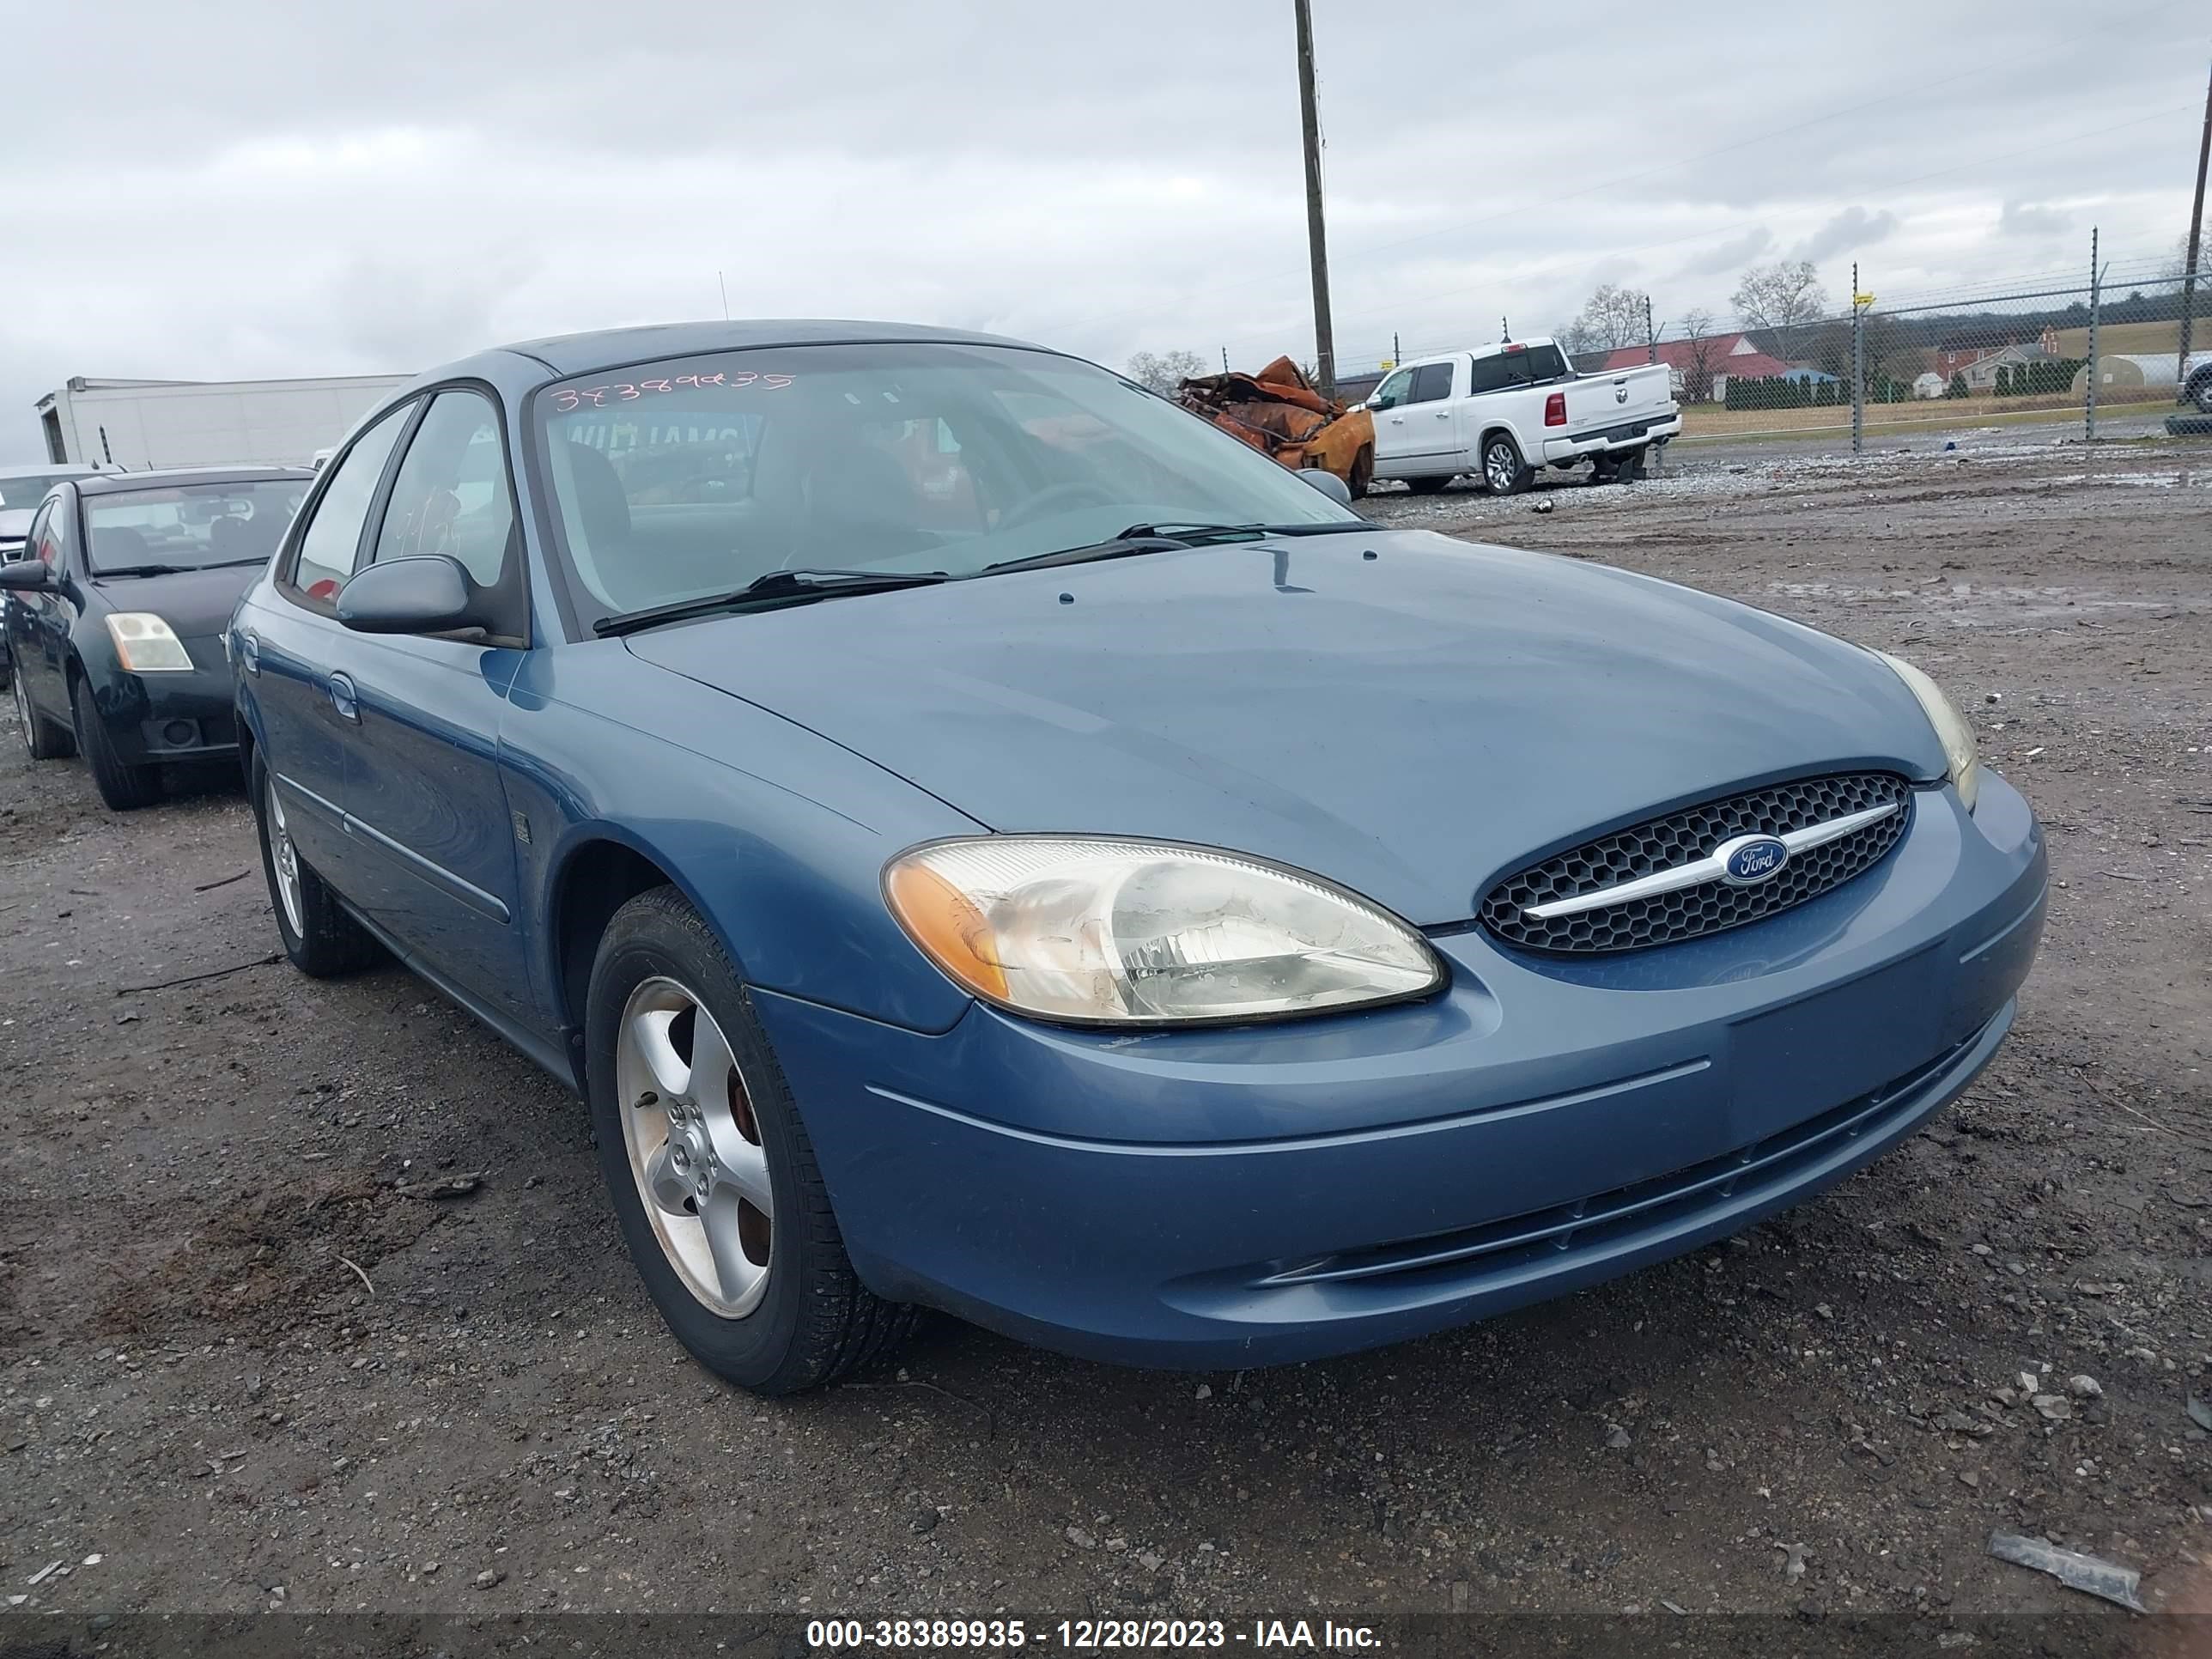 vin: 1FAFP55S91A203645 1FAFP55S91A203645 2001 ford taurus 3000 for Sale in 17372, 10 Auction Drive, Latimore Township, Pennsylvania, USA